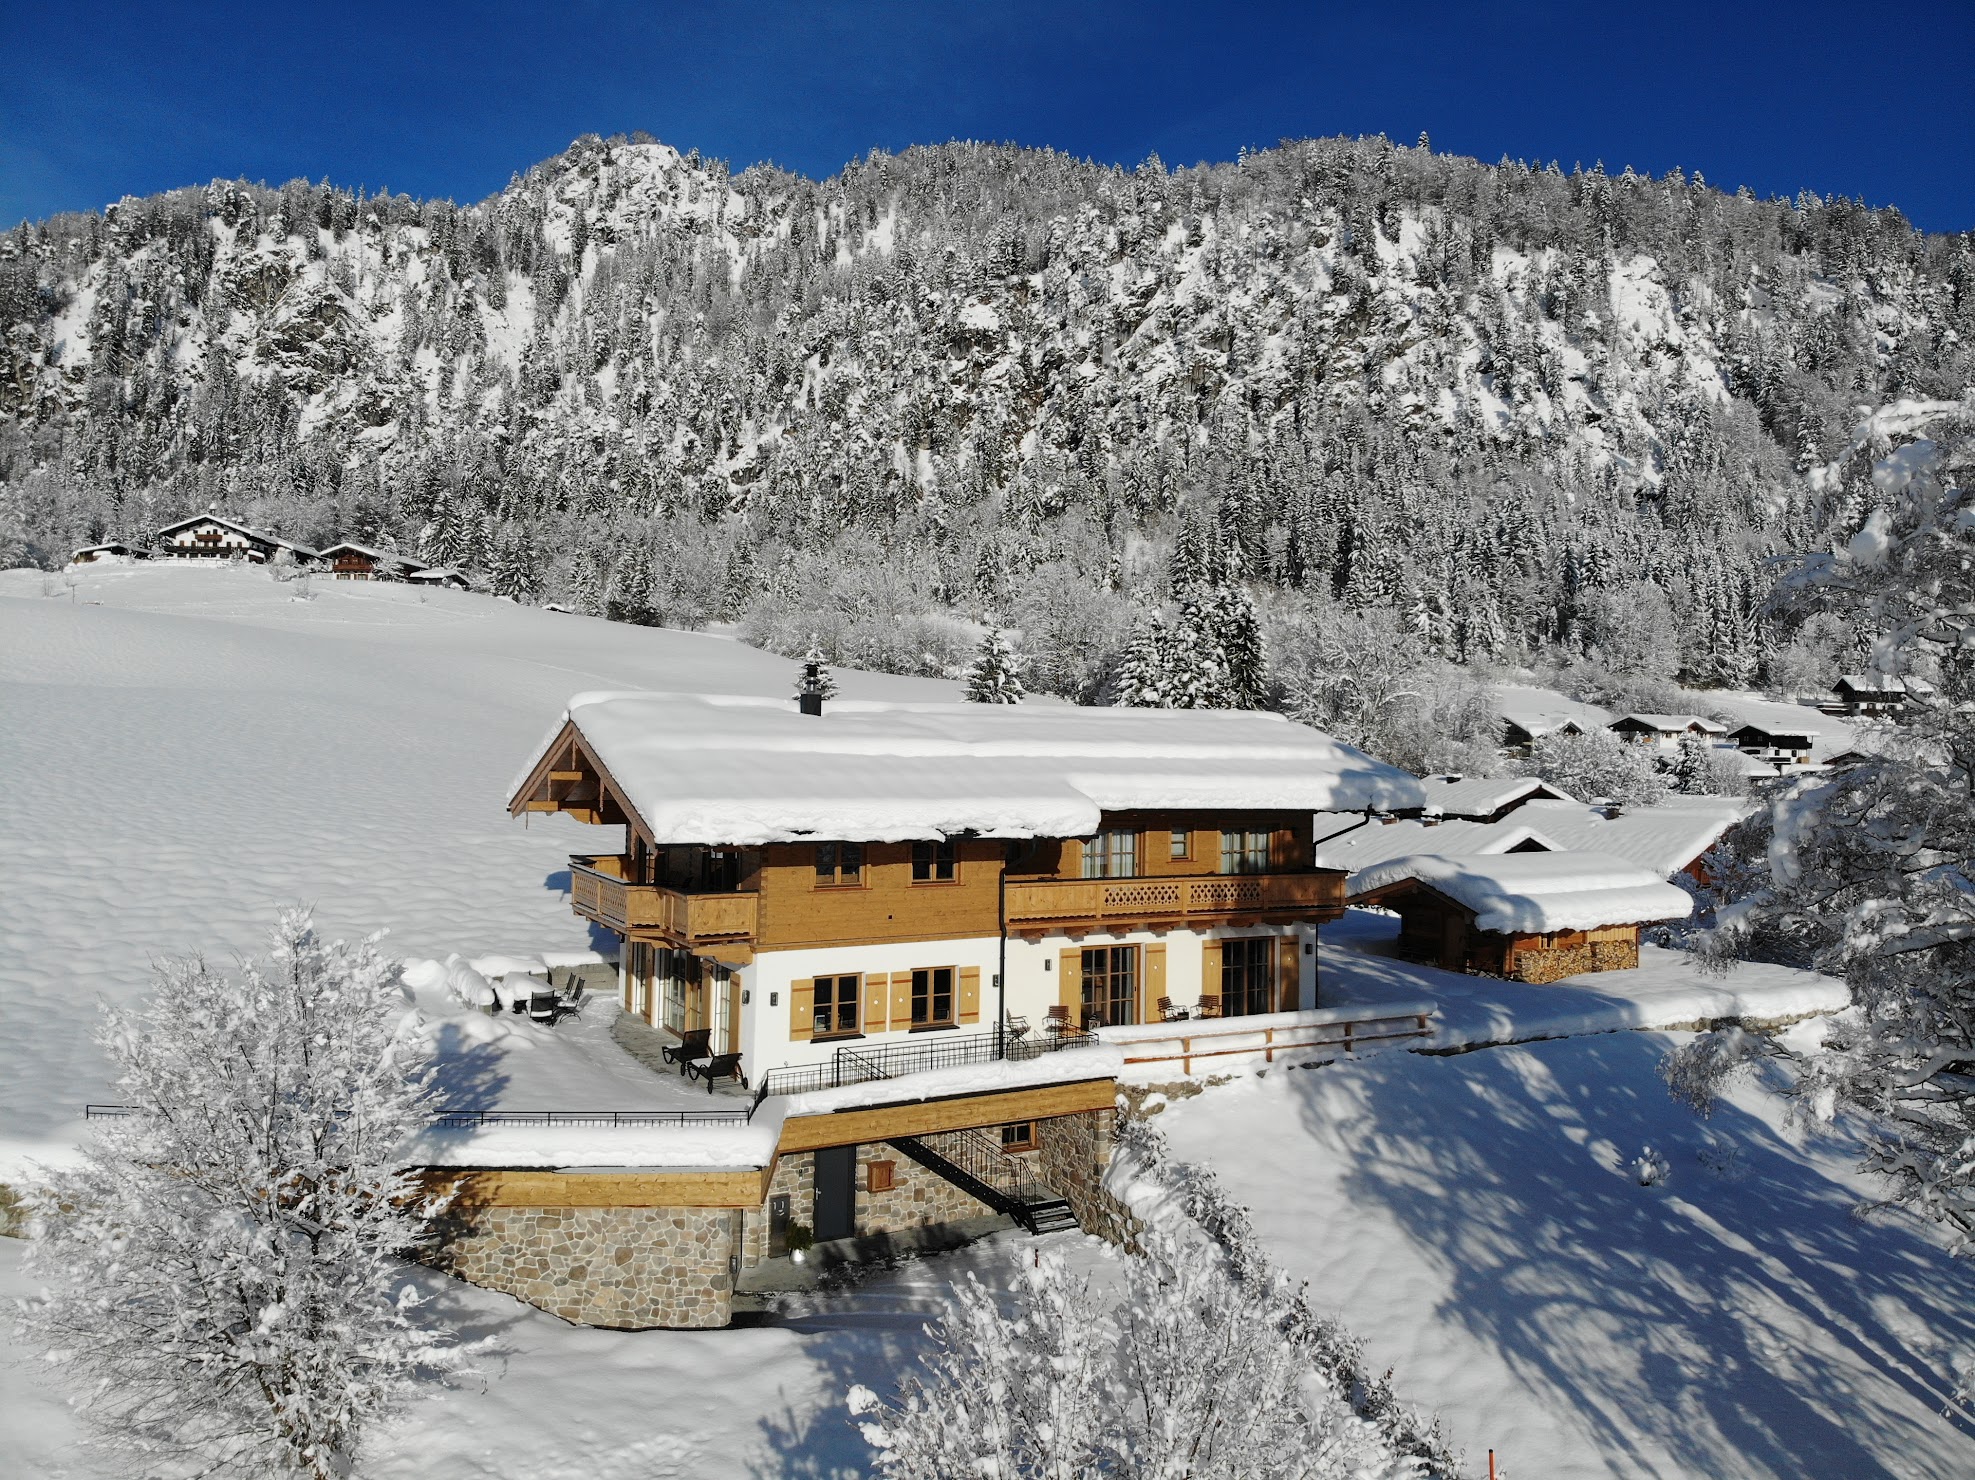 Chalet at the weather cross